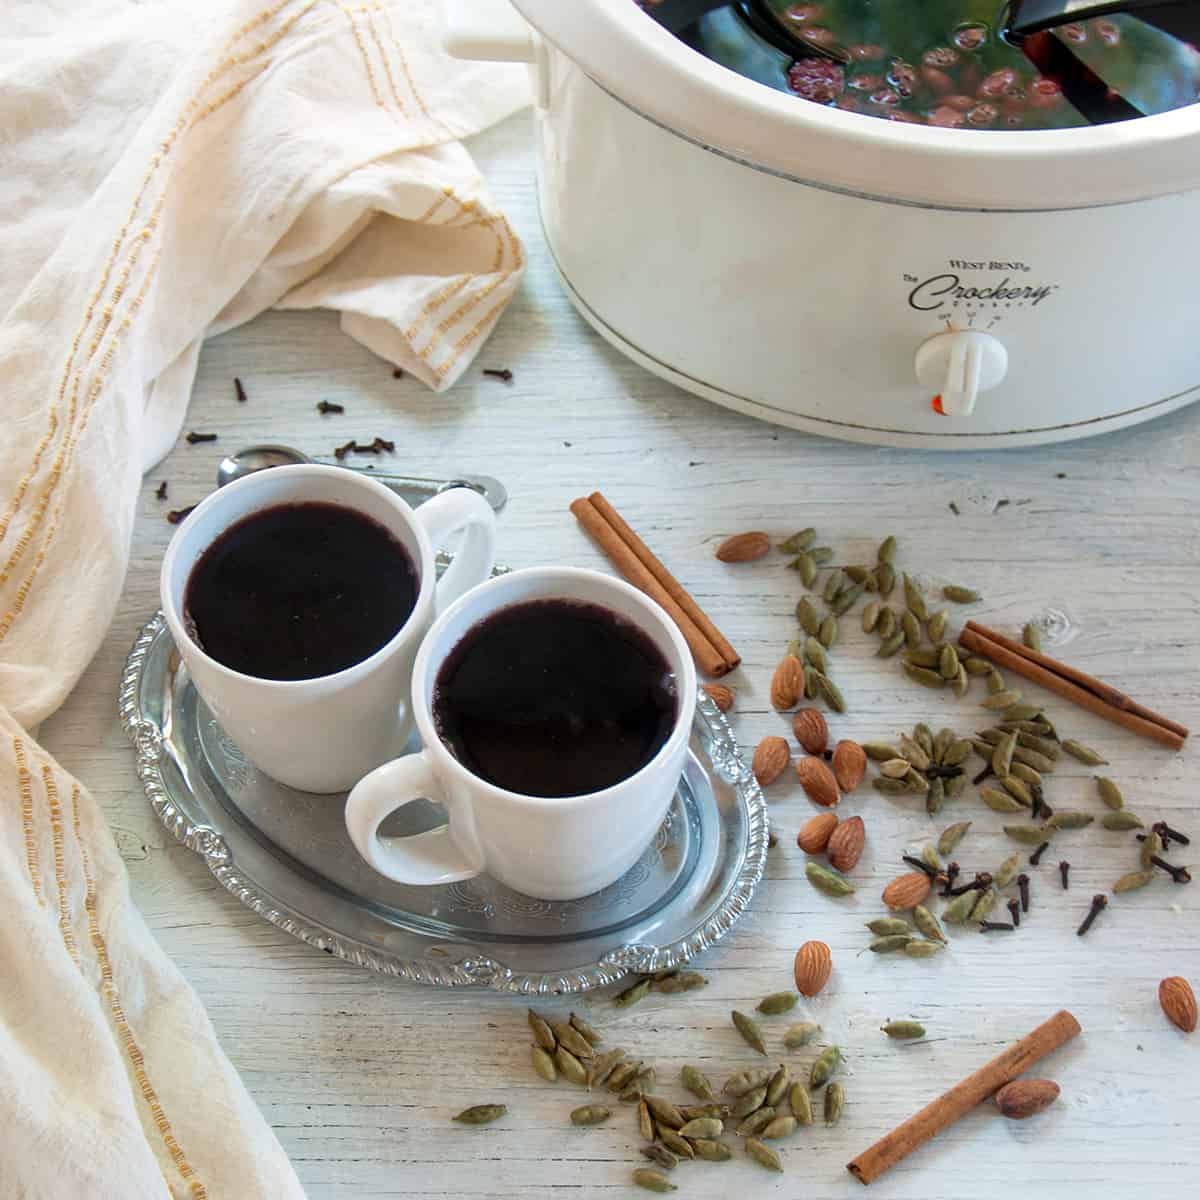 Two mugs filled with slow cooker Scandinavian glogg, surrounded by whole spices, nuts, and a crock pot full of the drink.